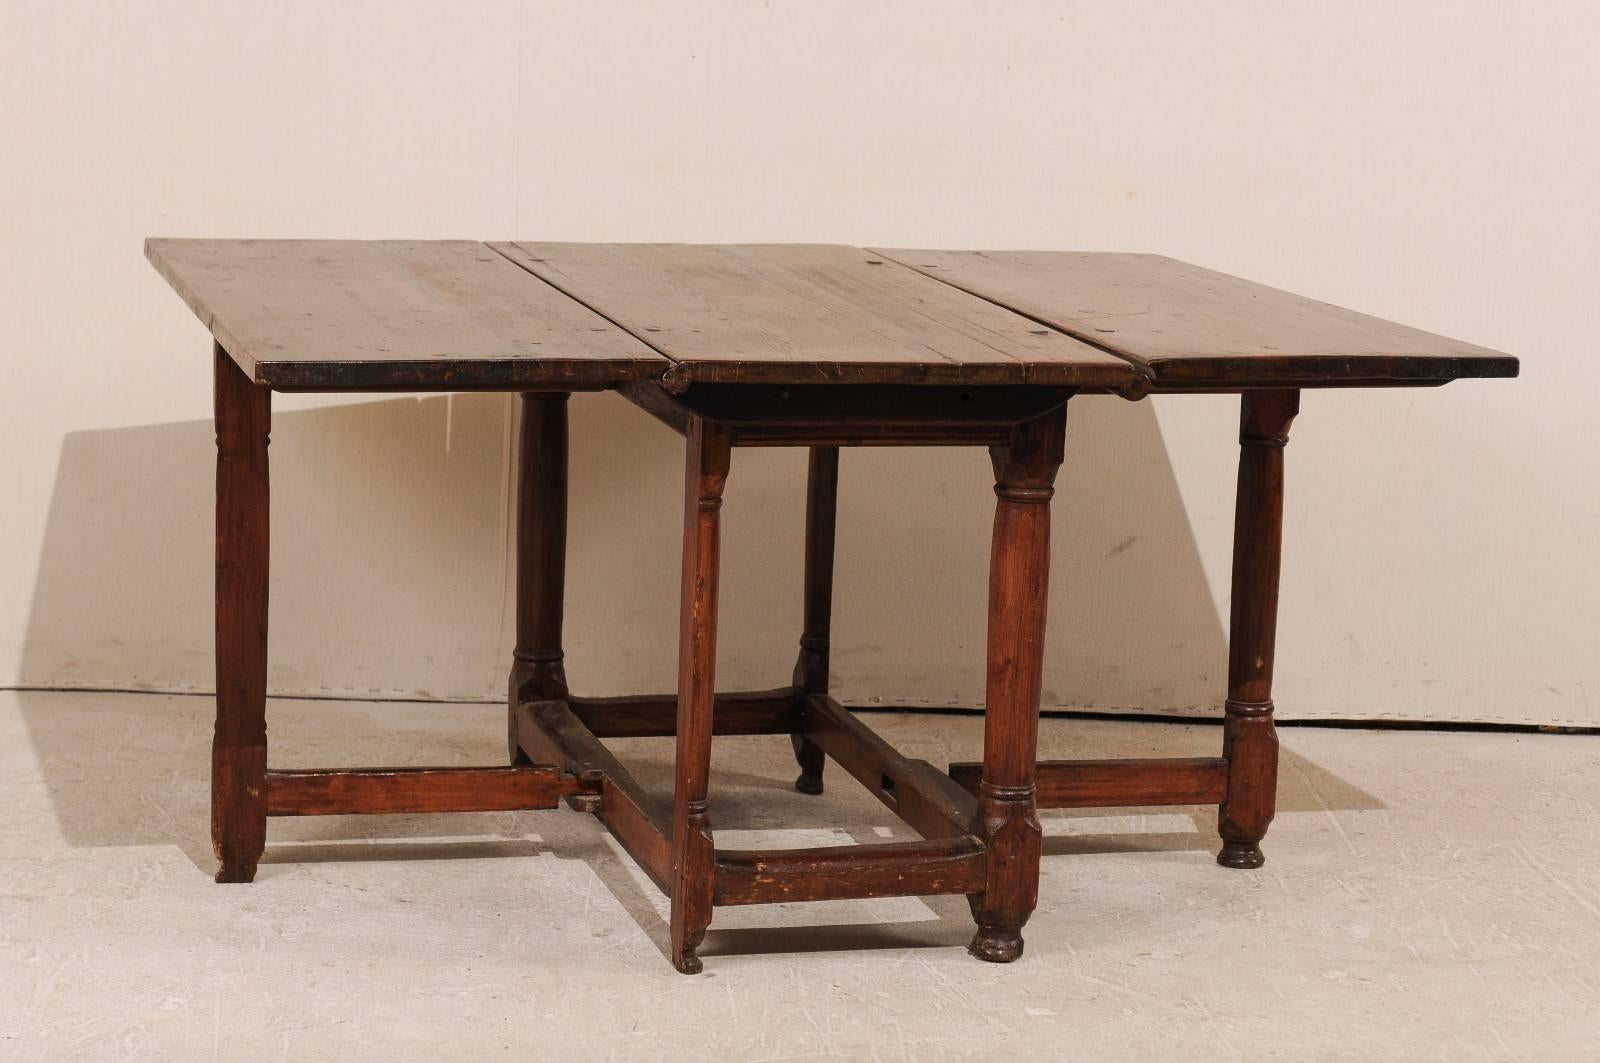 A Swedish 18th century period Baroque gate leg table. This 18th century Swedish table features two drop leaves and gate legs. This table is made from fir wood. This fantastic Swedish table offers great functionality, as it is narrow when the leaves